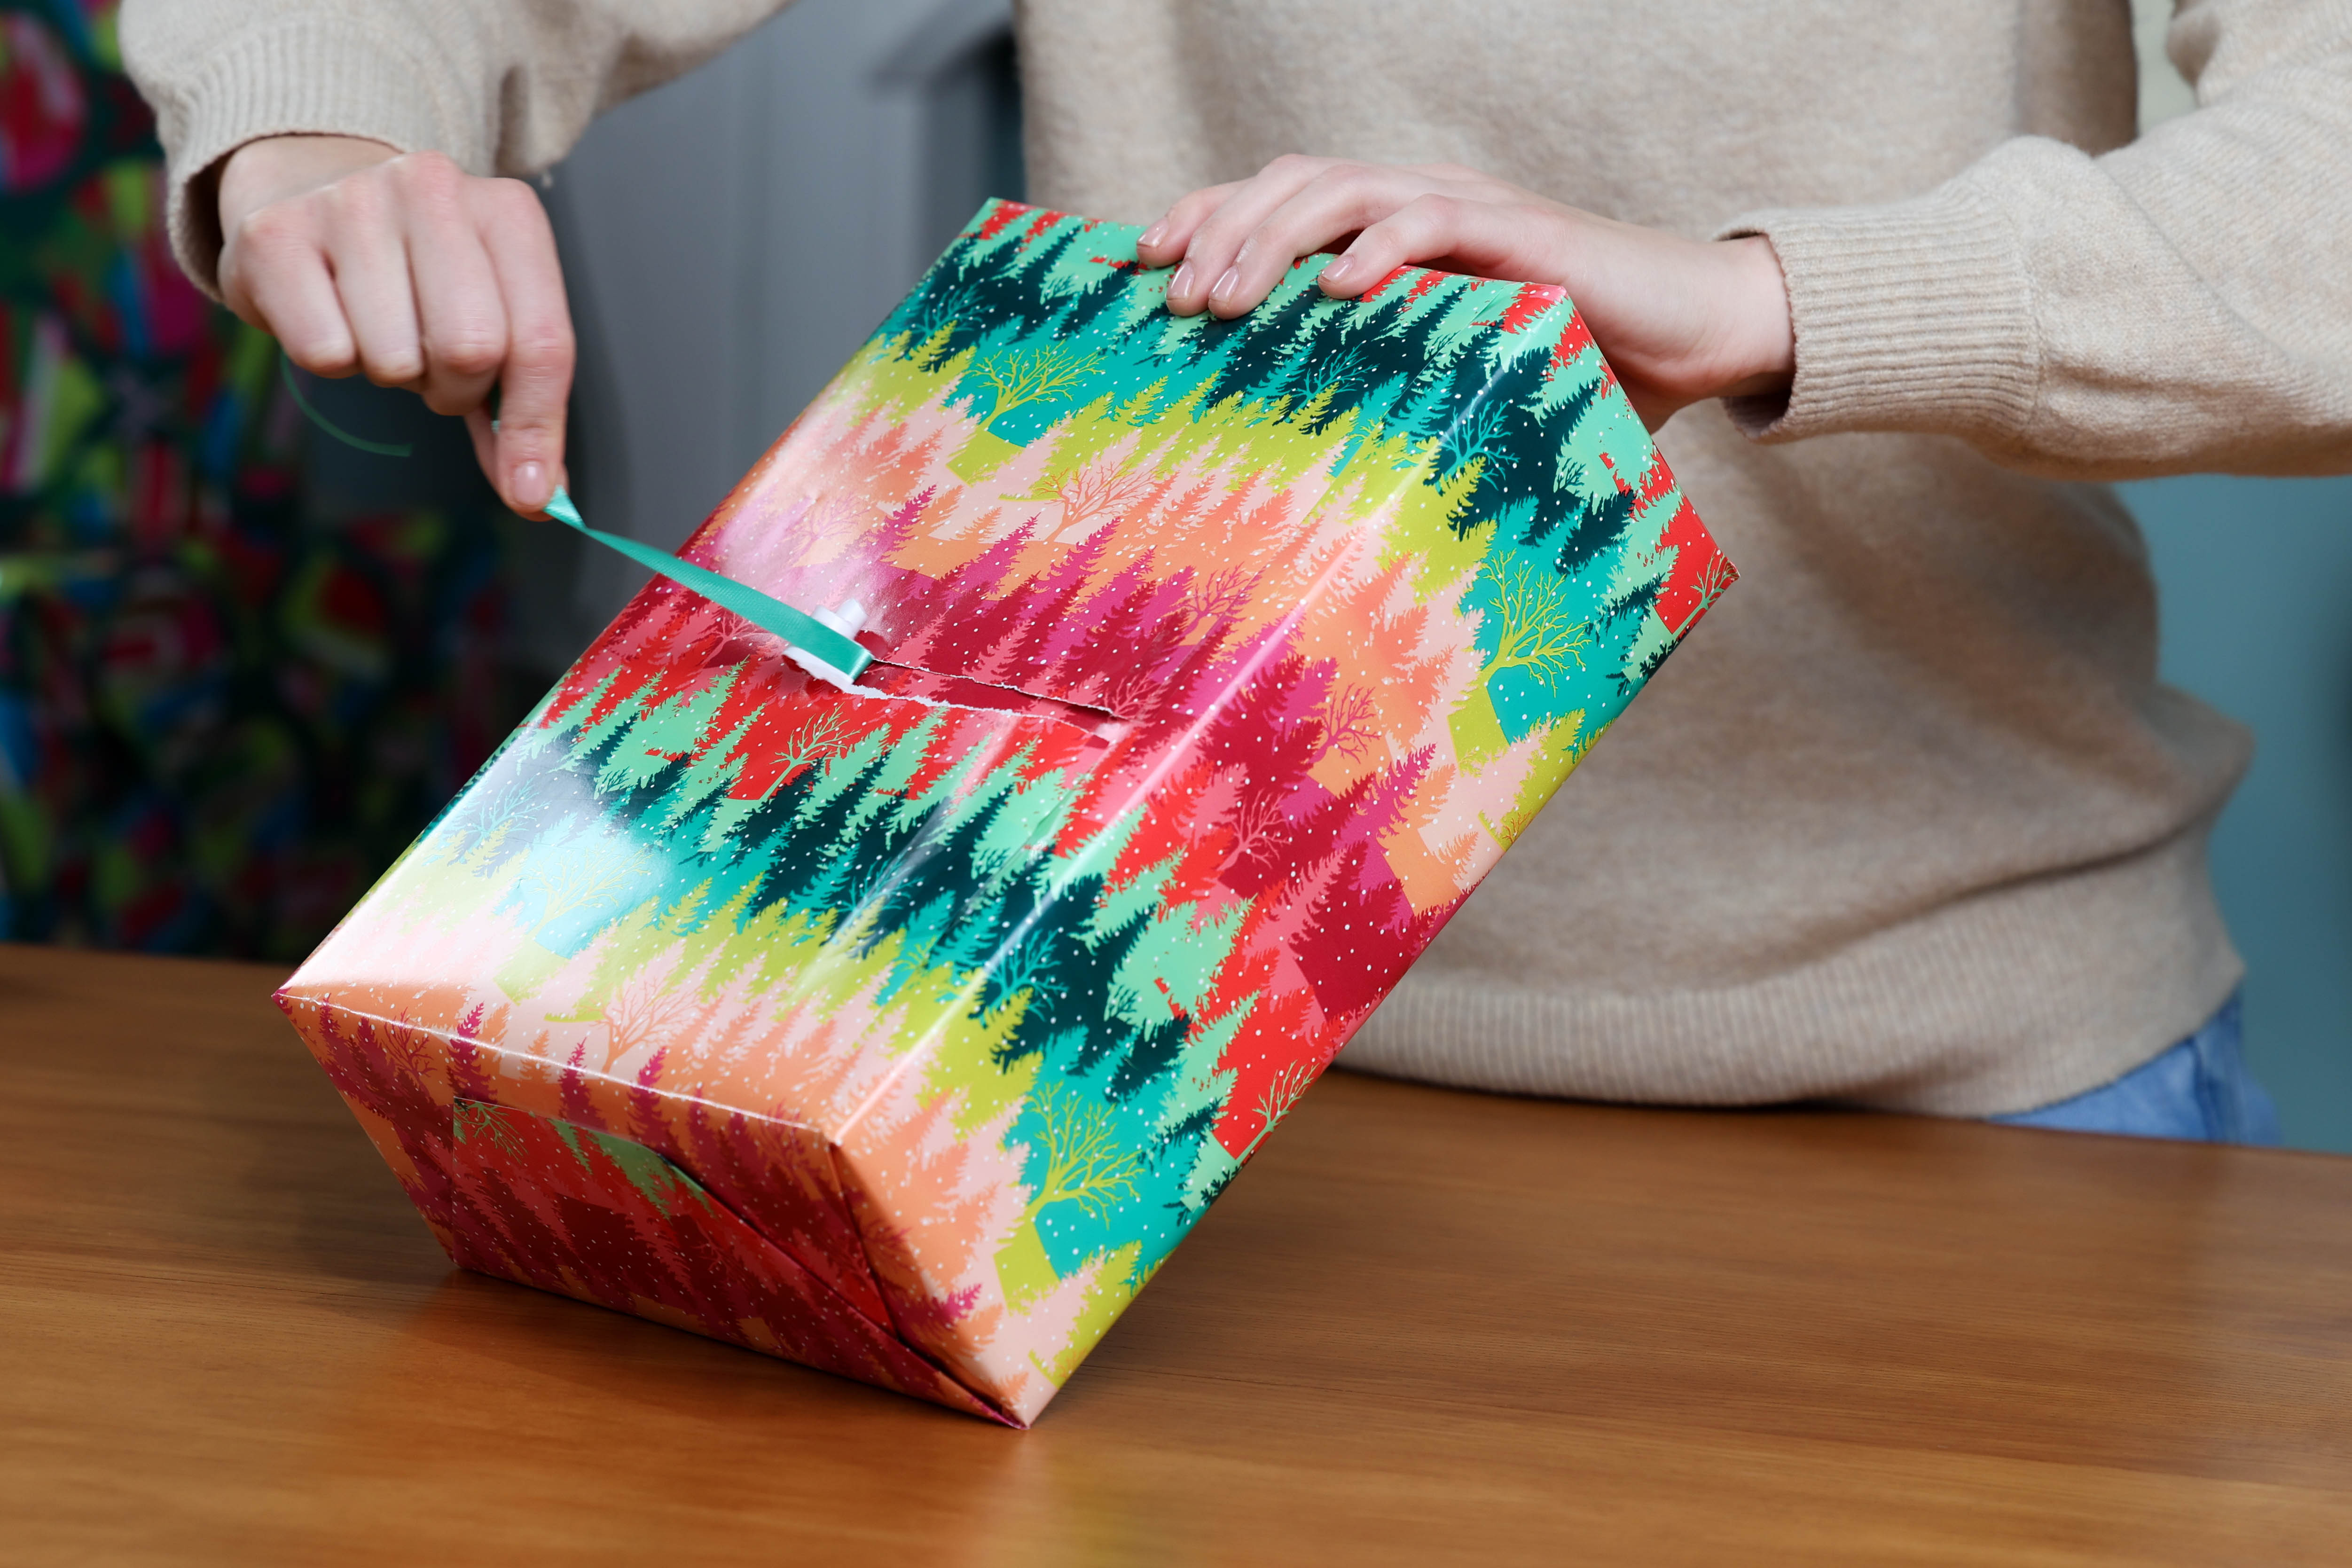 How to Wrap a Gift that Opens With Ease